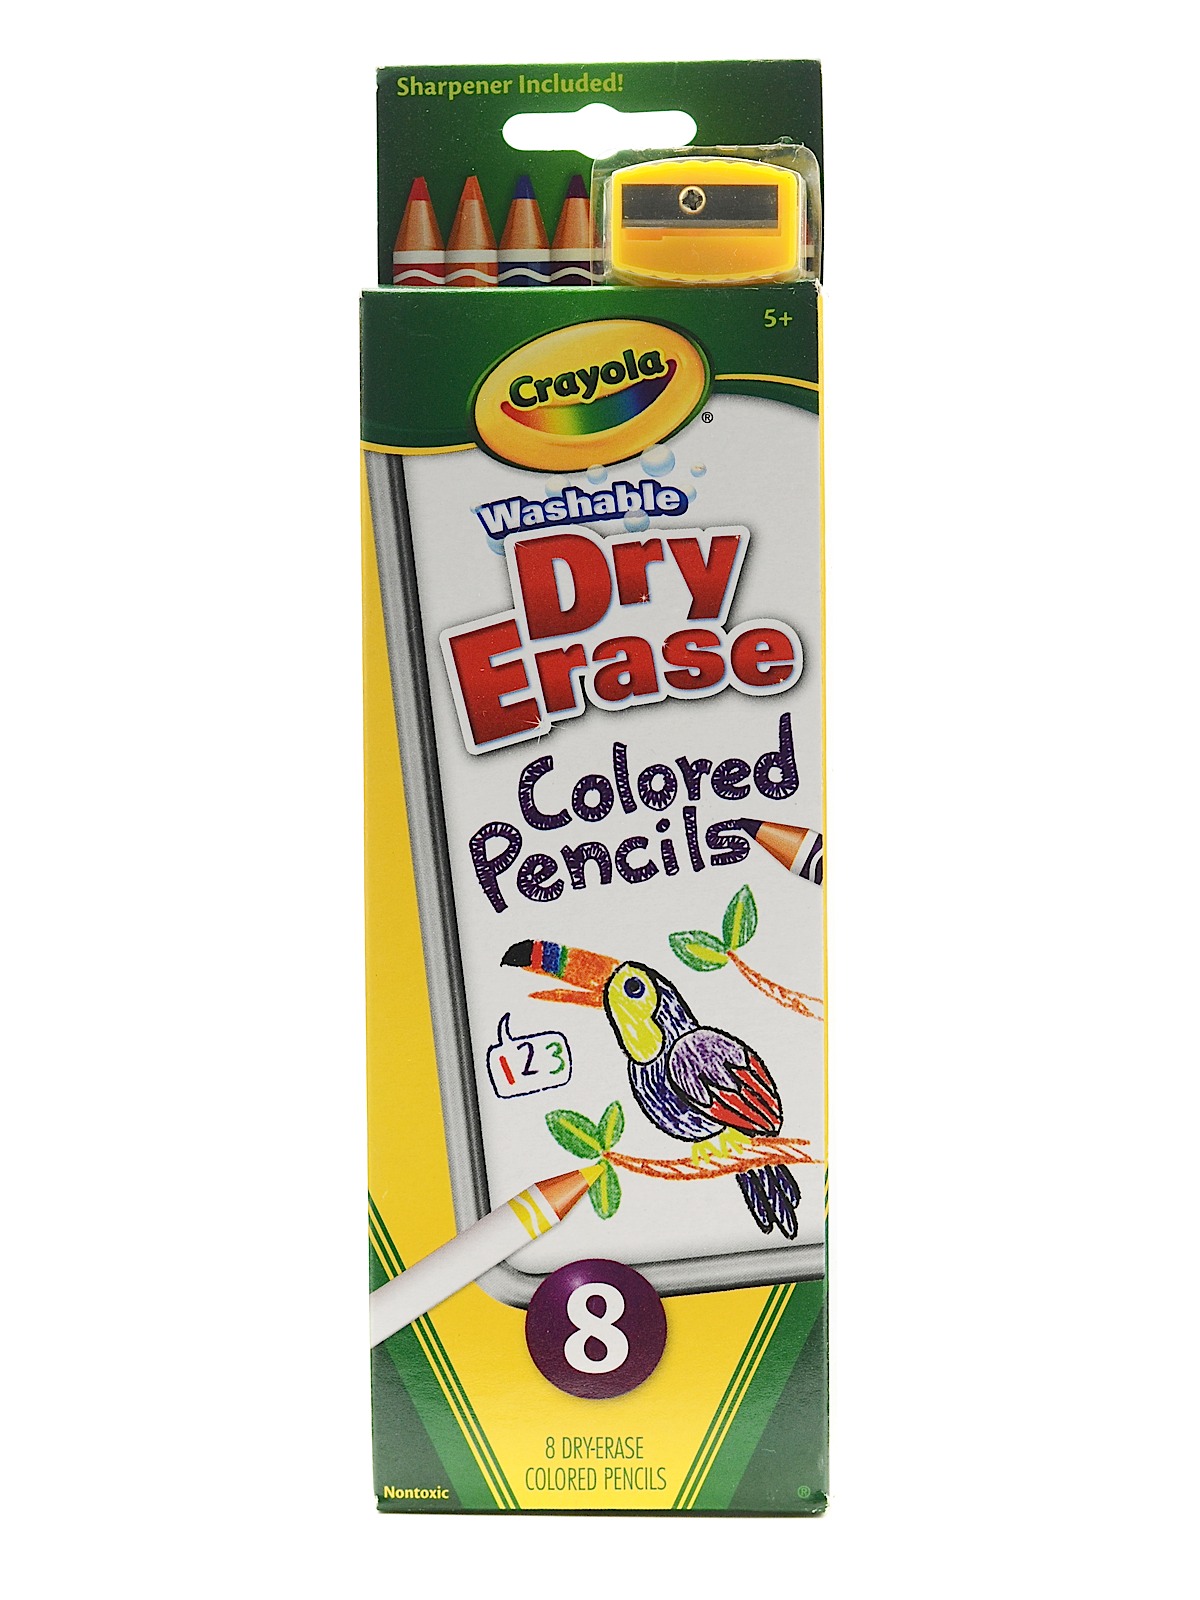 Washable Dry Erase Colored Pencils Pack Of 8